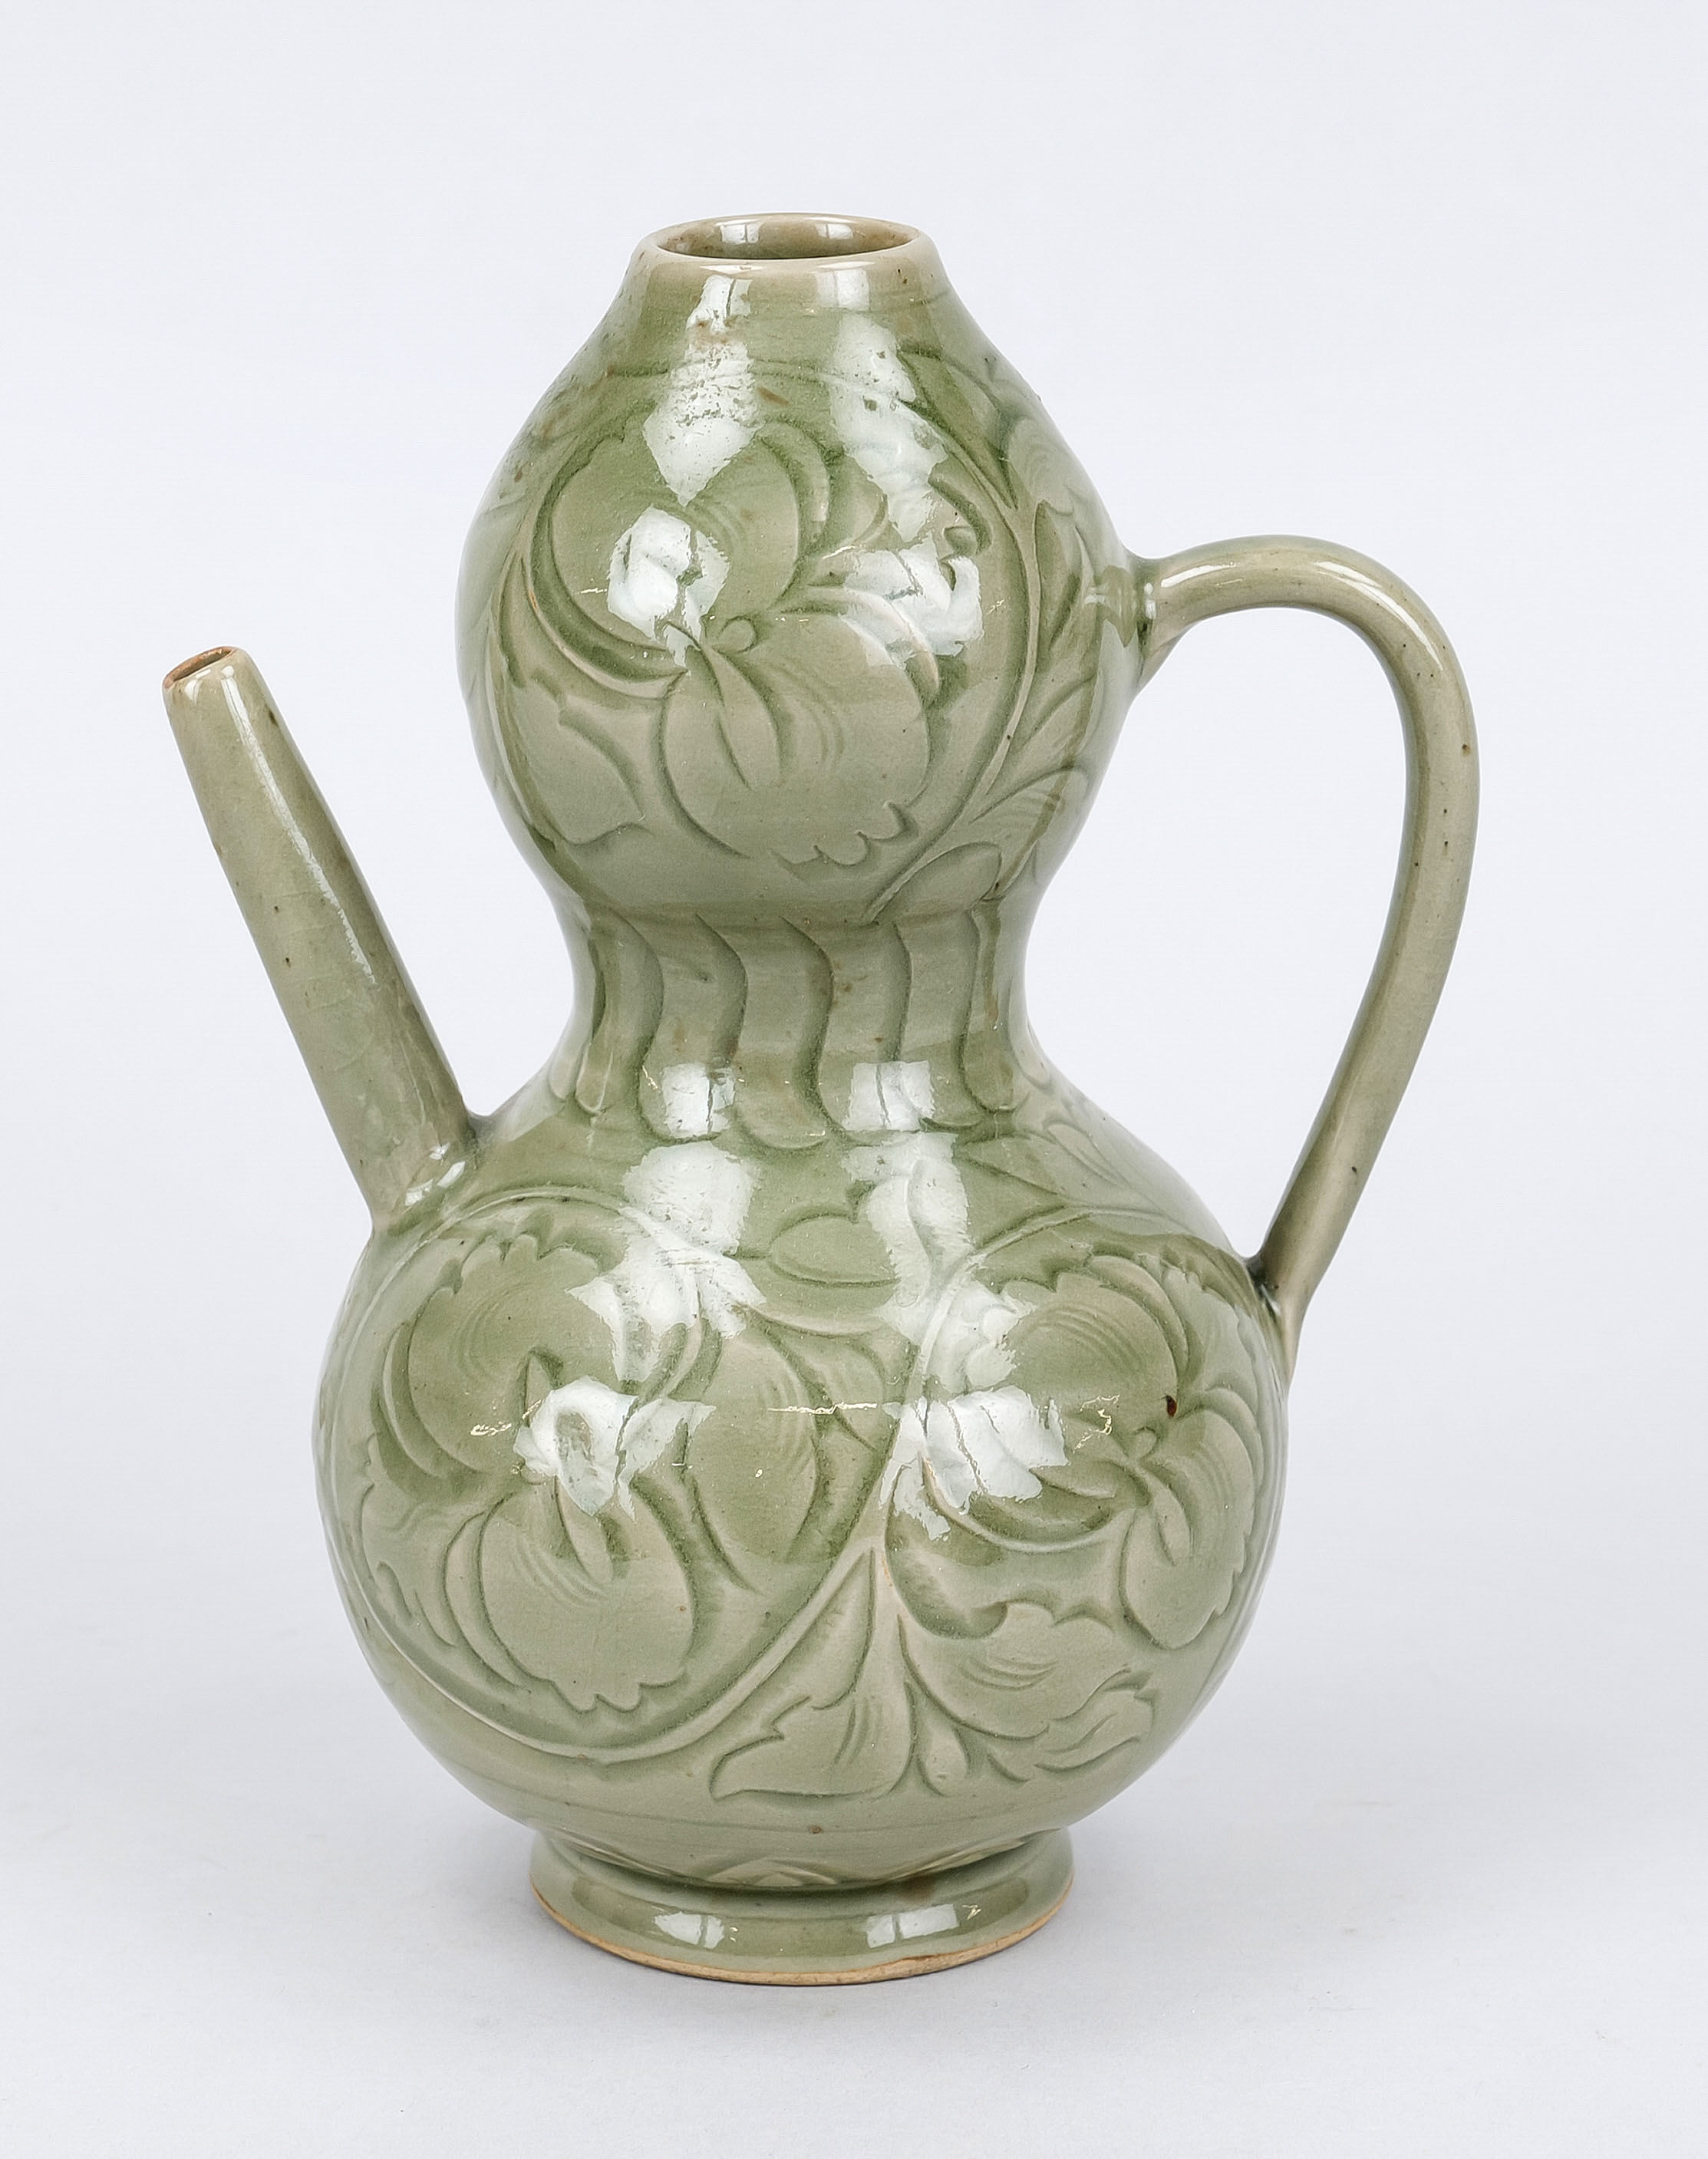 Longquan celadon jug, China 19th/20th century, double calabash shape with loop handle and